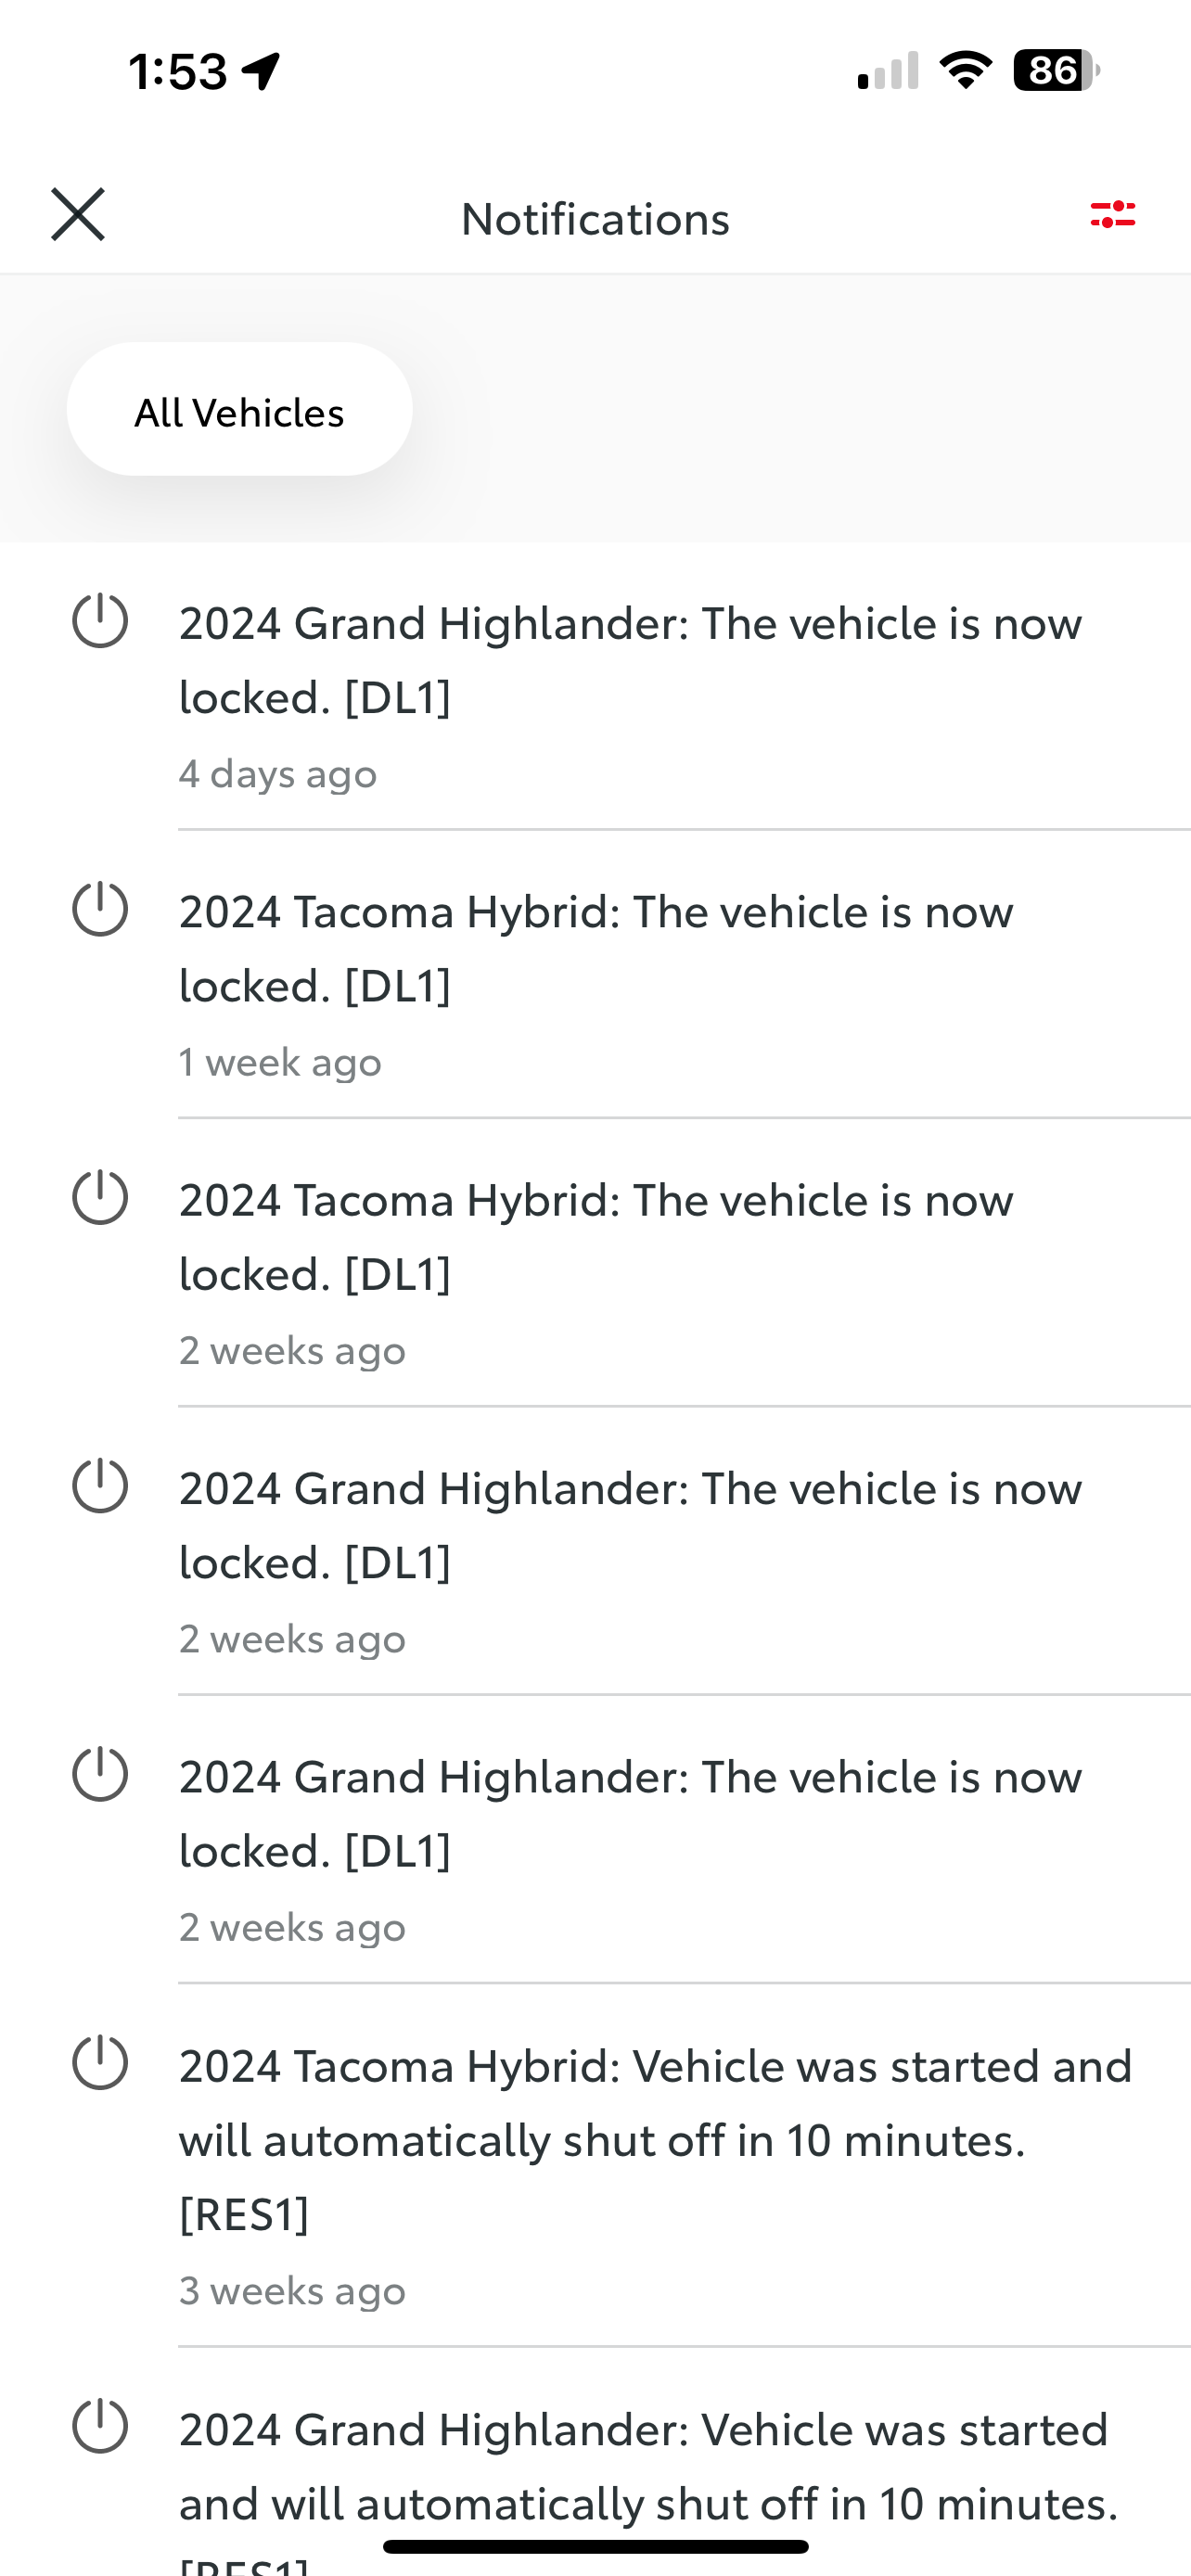 2024 Tacoma Toyota app, does your notifications show IMG_4838.PNG